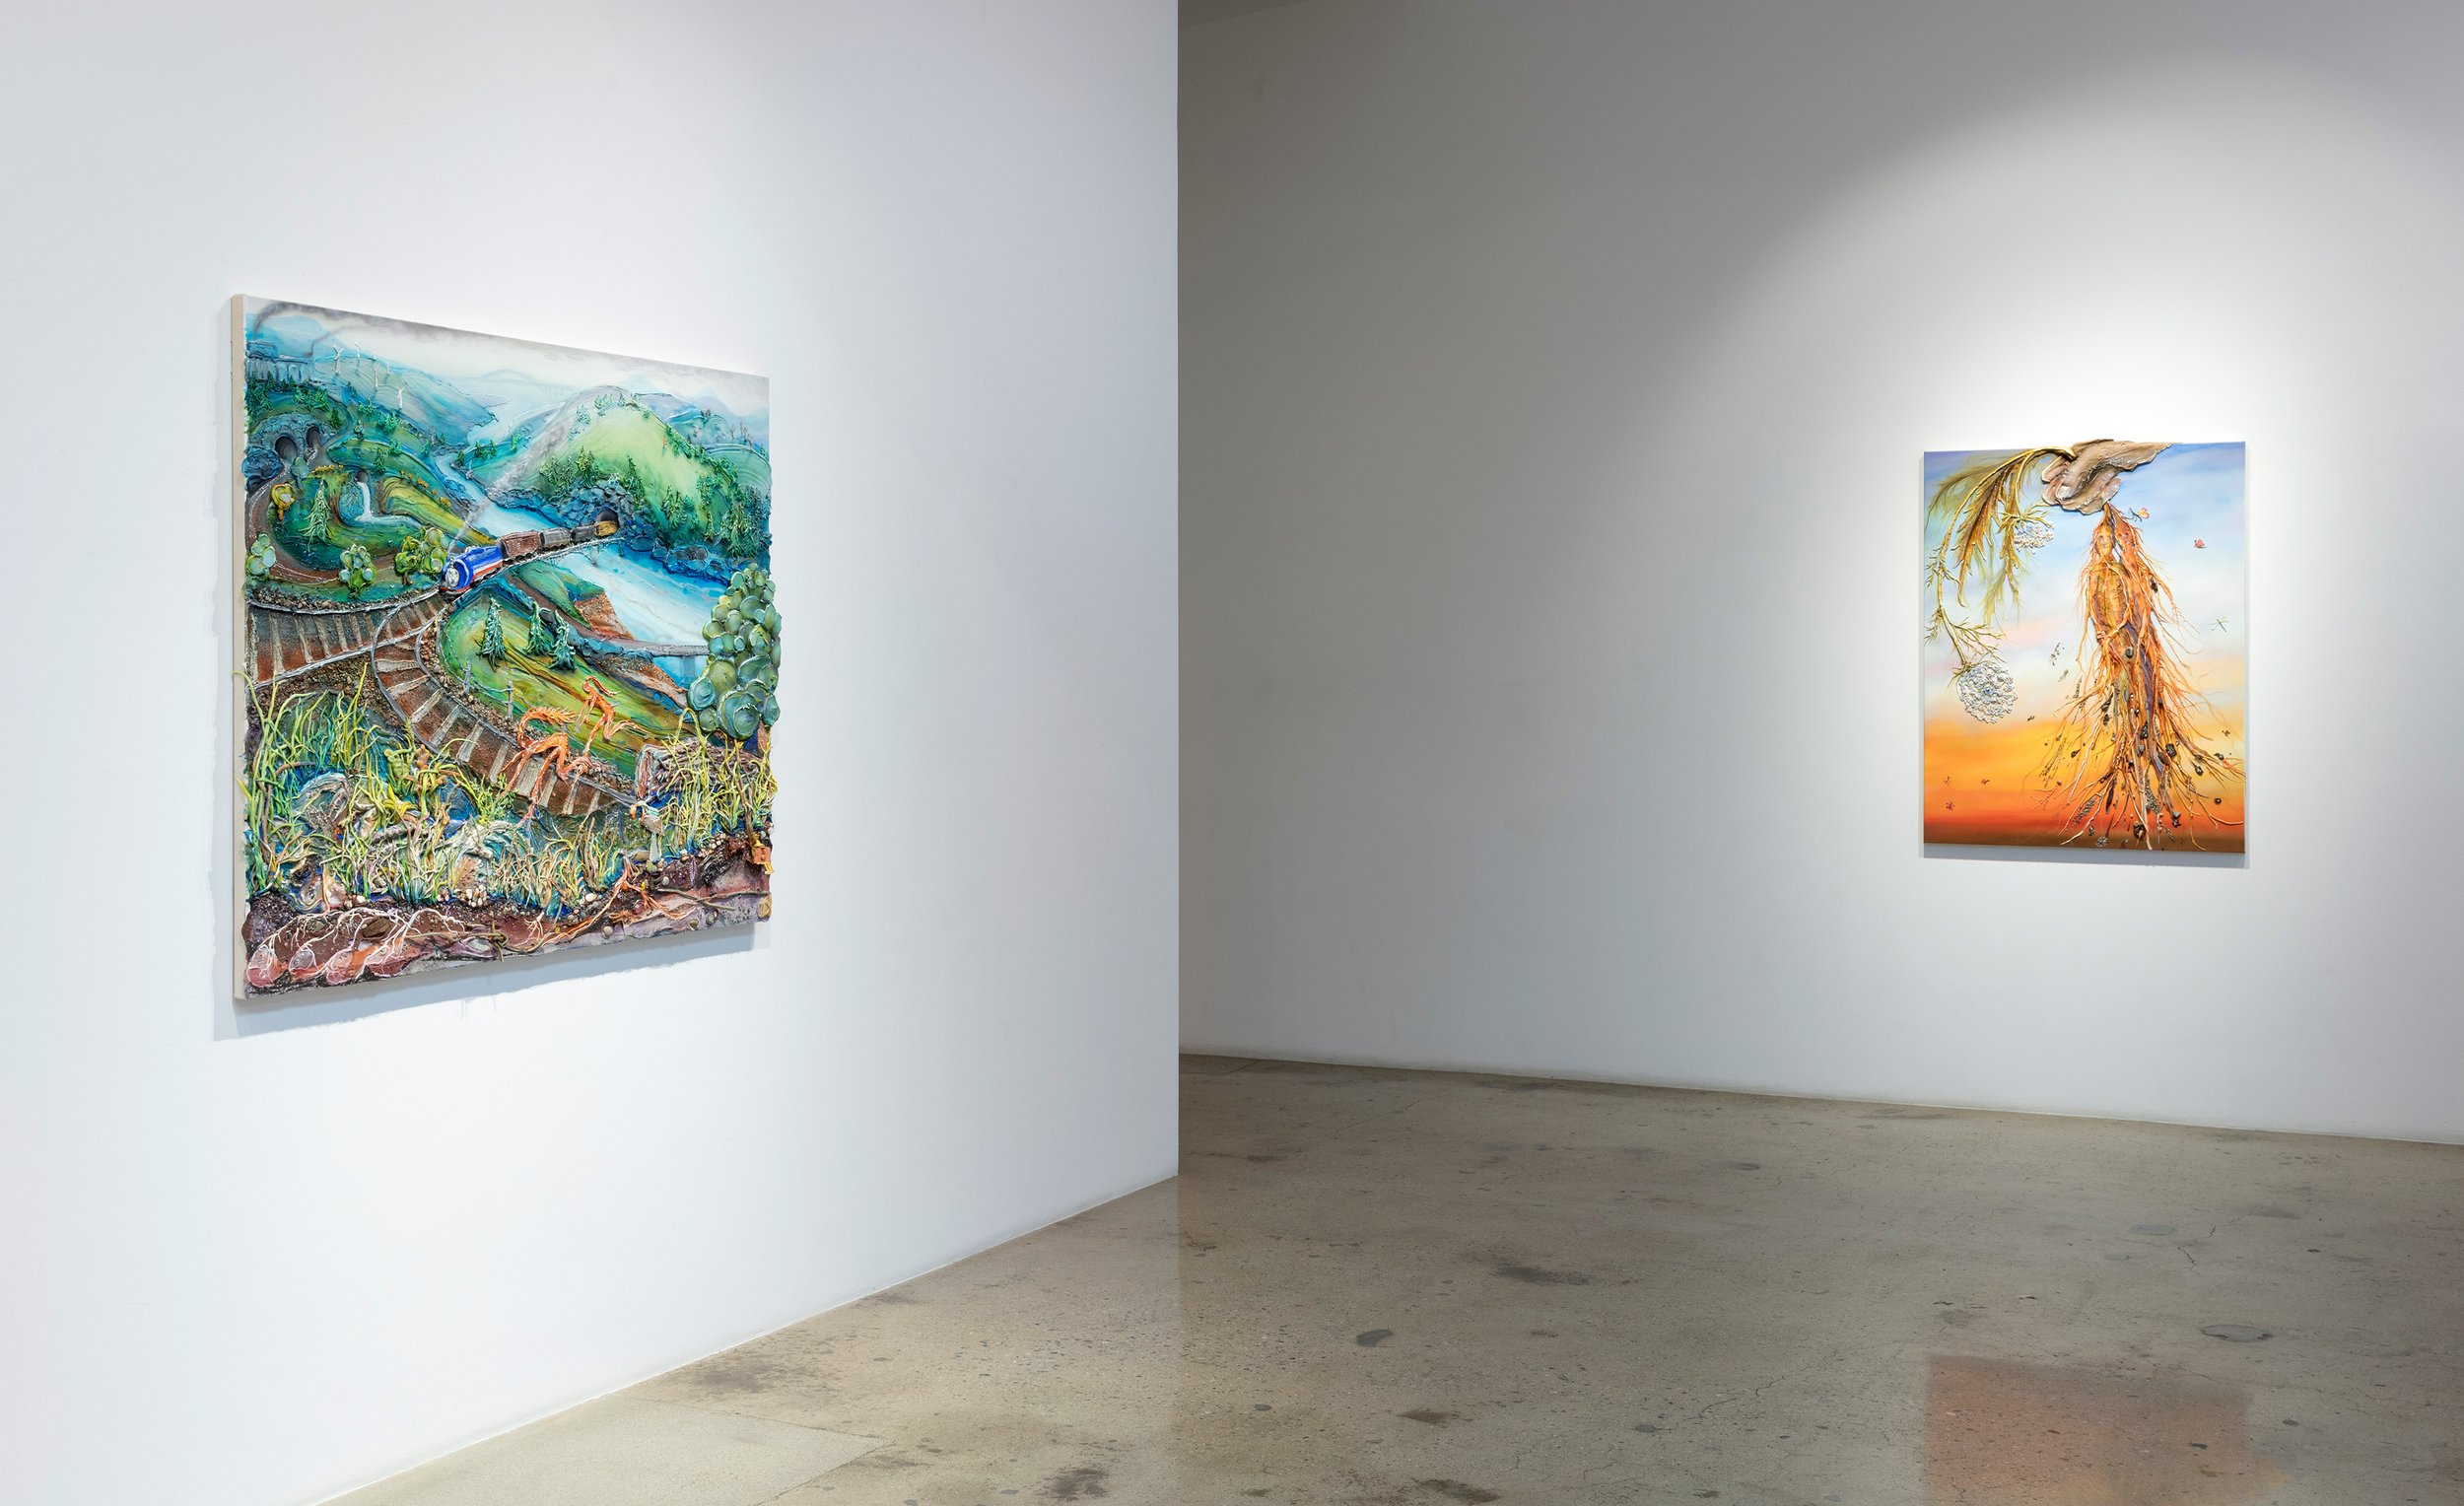  Installation view from “Unseen Animal” at Steve Turner, 2022, Los Angeles, California.  